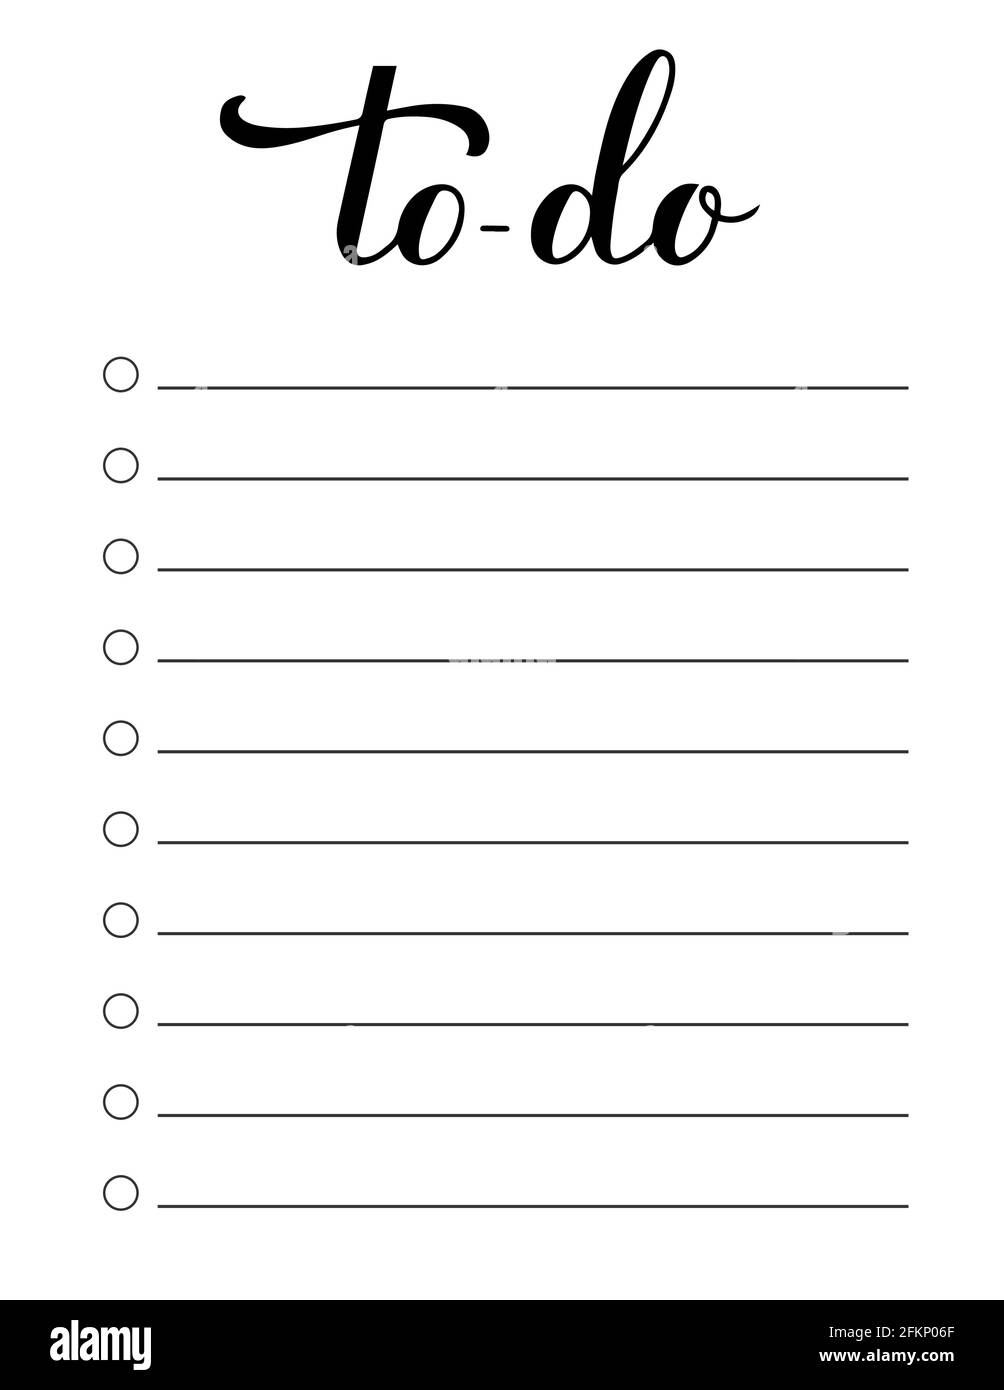 To do list planner template. Daily planner page. Lined paper sheet Intended For Blank To Do List Template